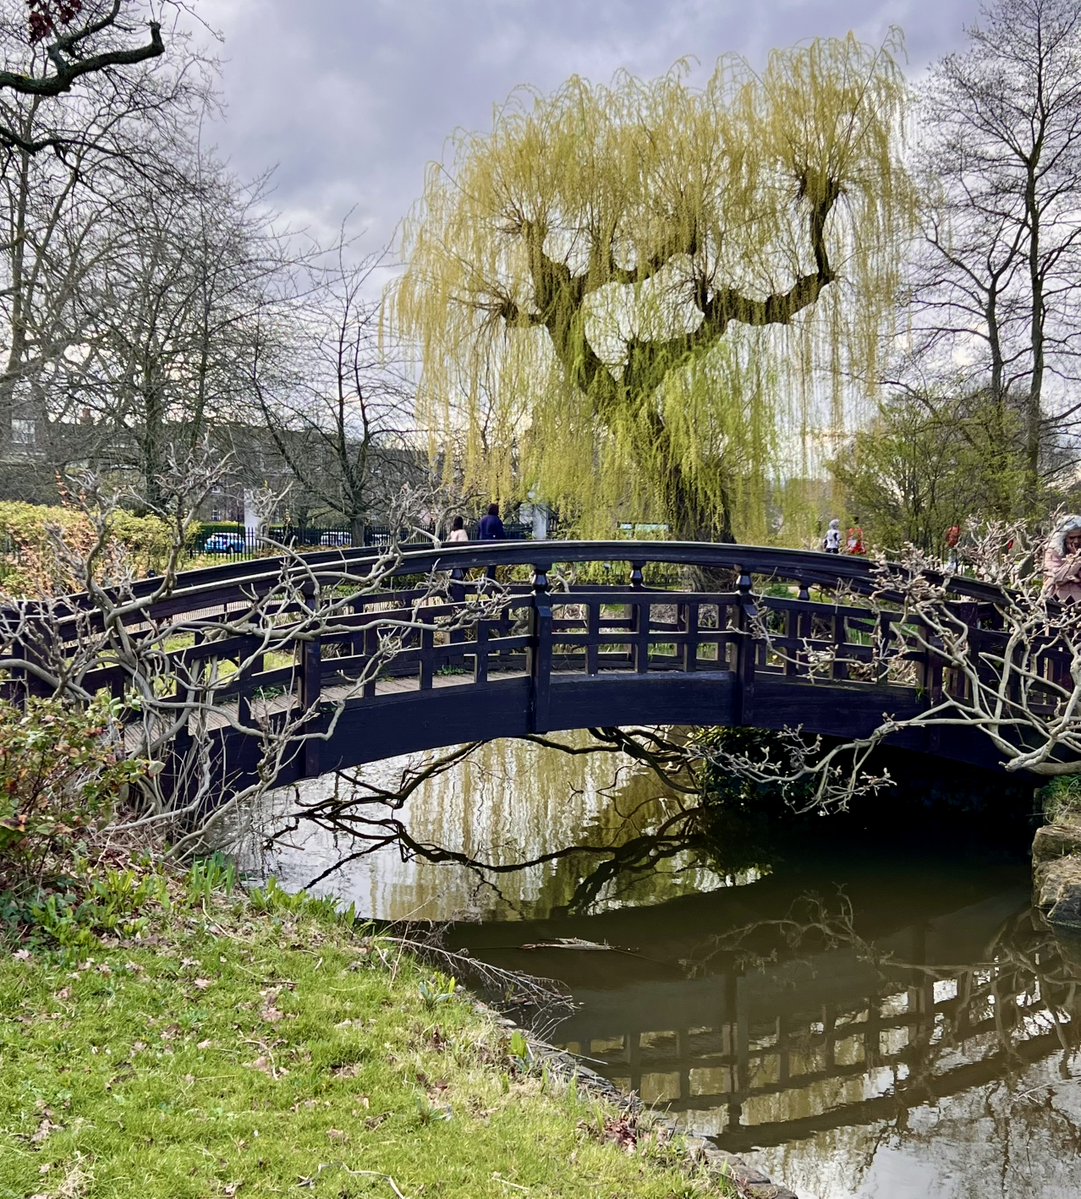 #bridgesThursday - in the formal 1930s garden within the older Regent's Park this little bridge with the willow behind it brings back memories of the patterns on old plates